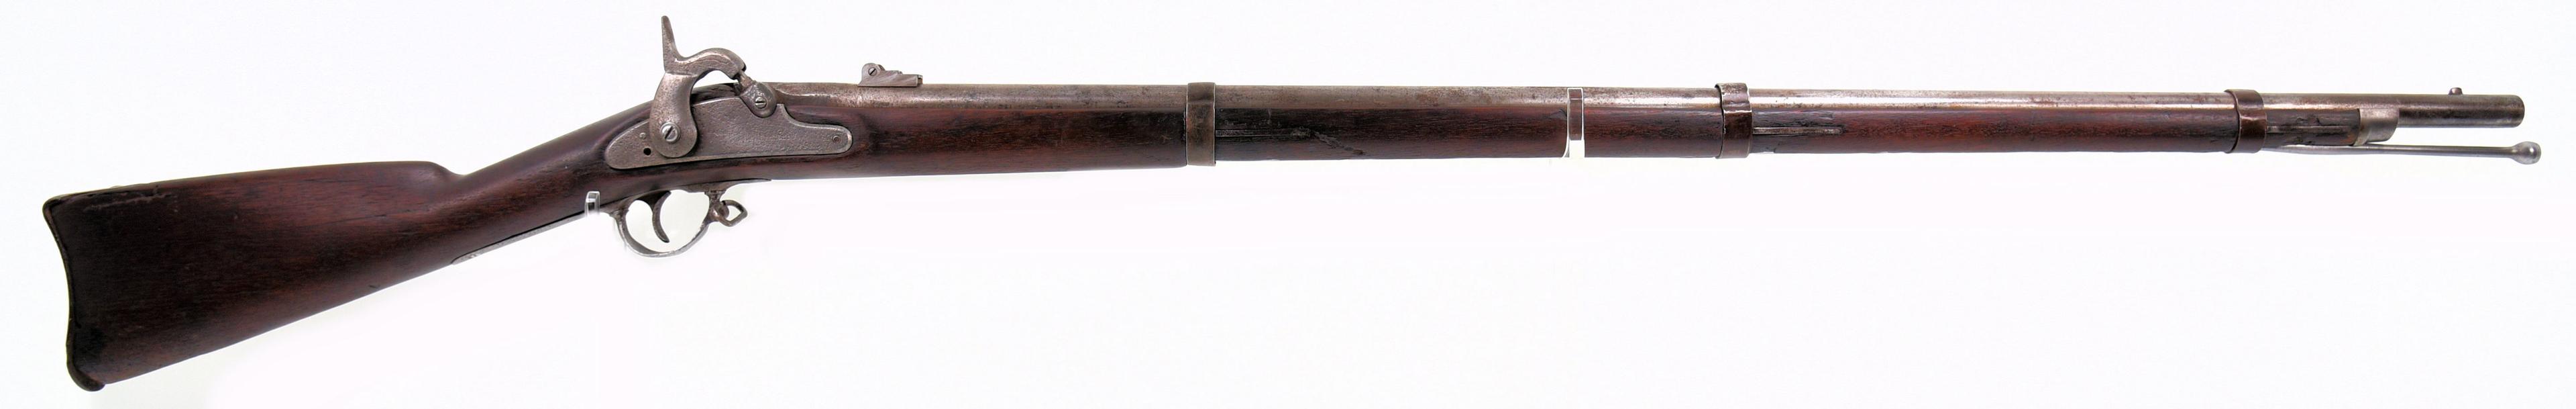 U.S. Springfield Armory 1861 Percussion Musket